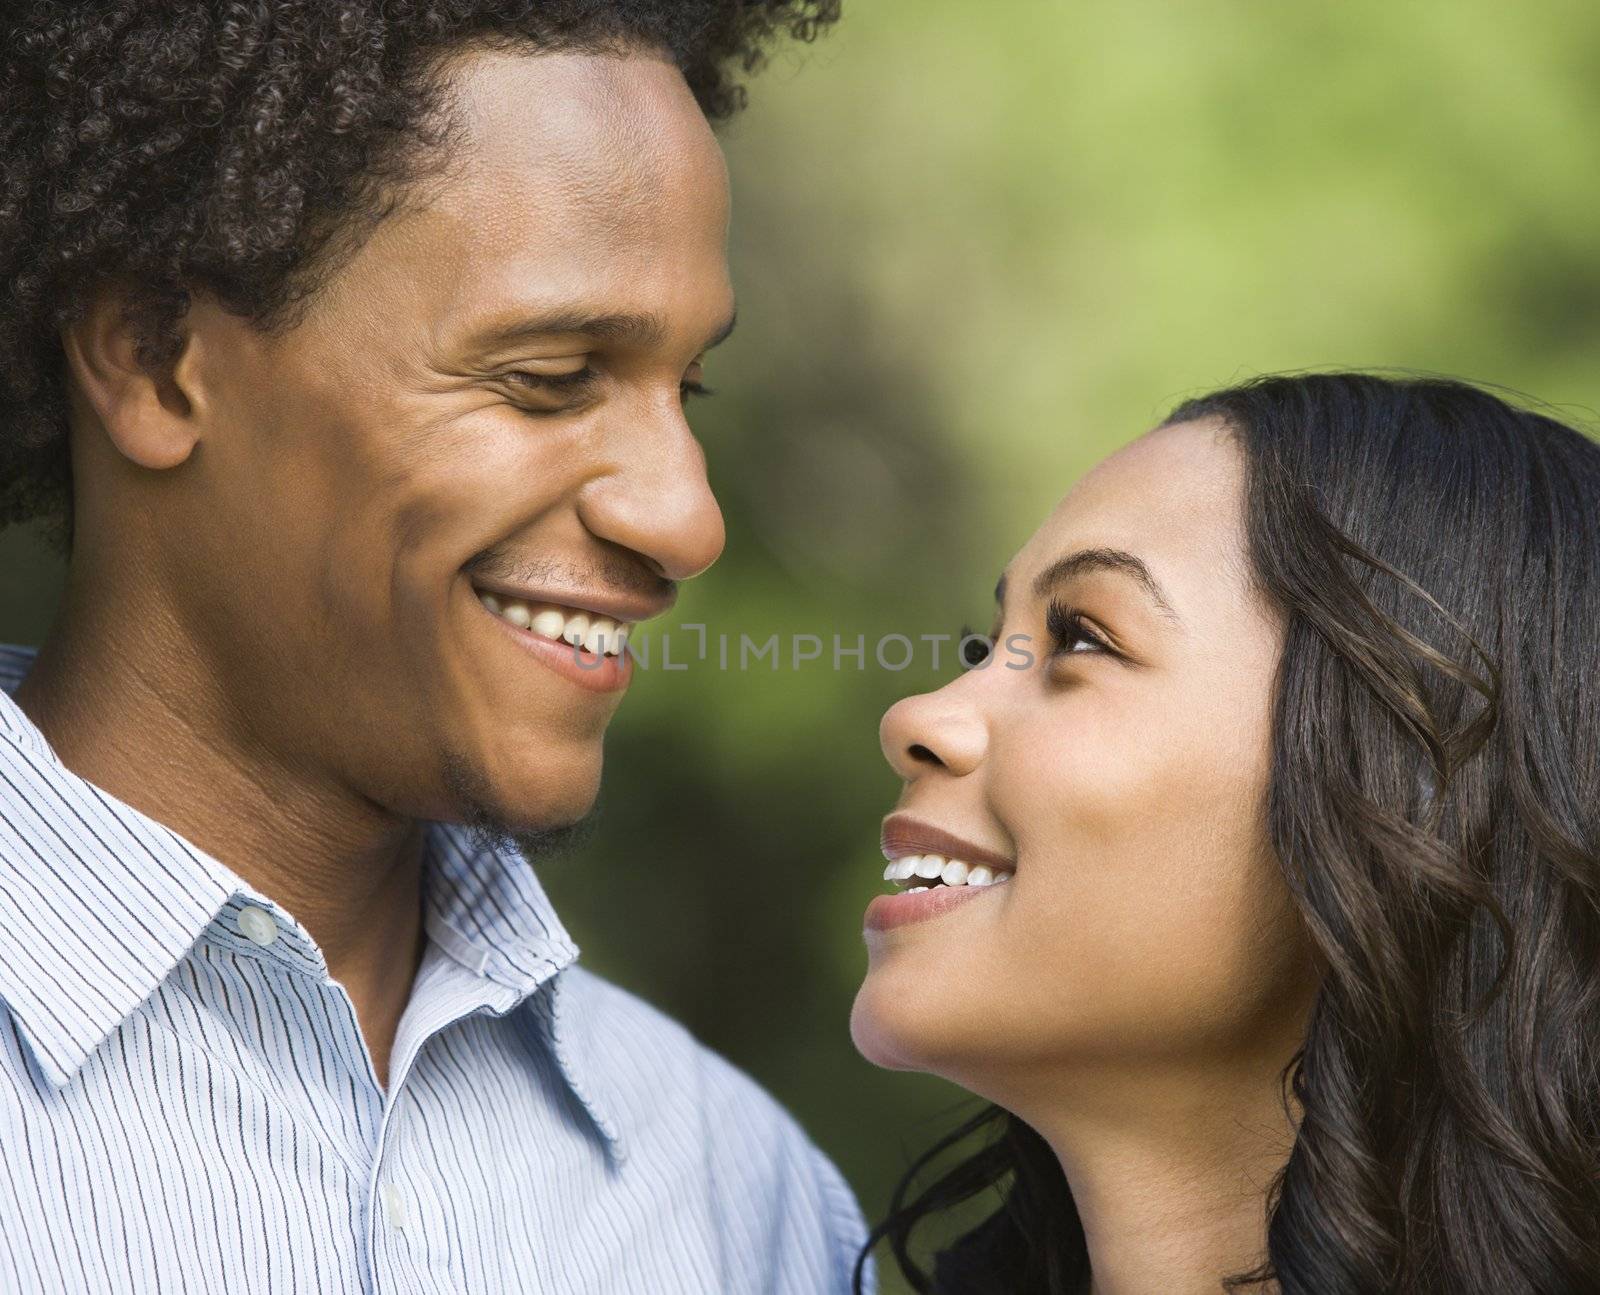 Portrait of smiling couple looking into eachother's eyes.